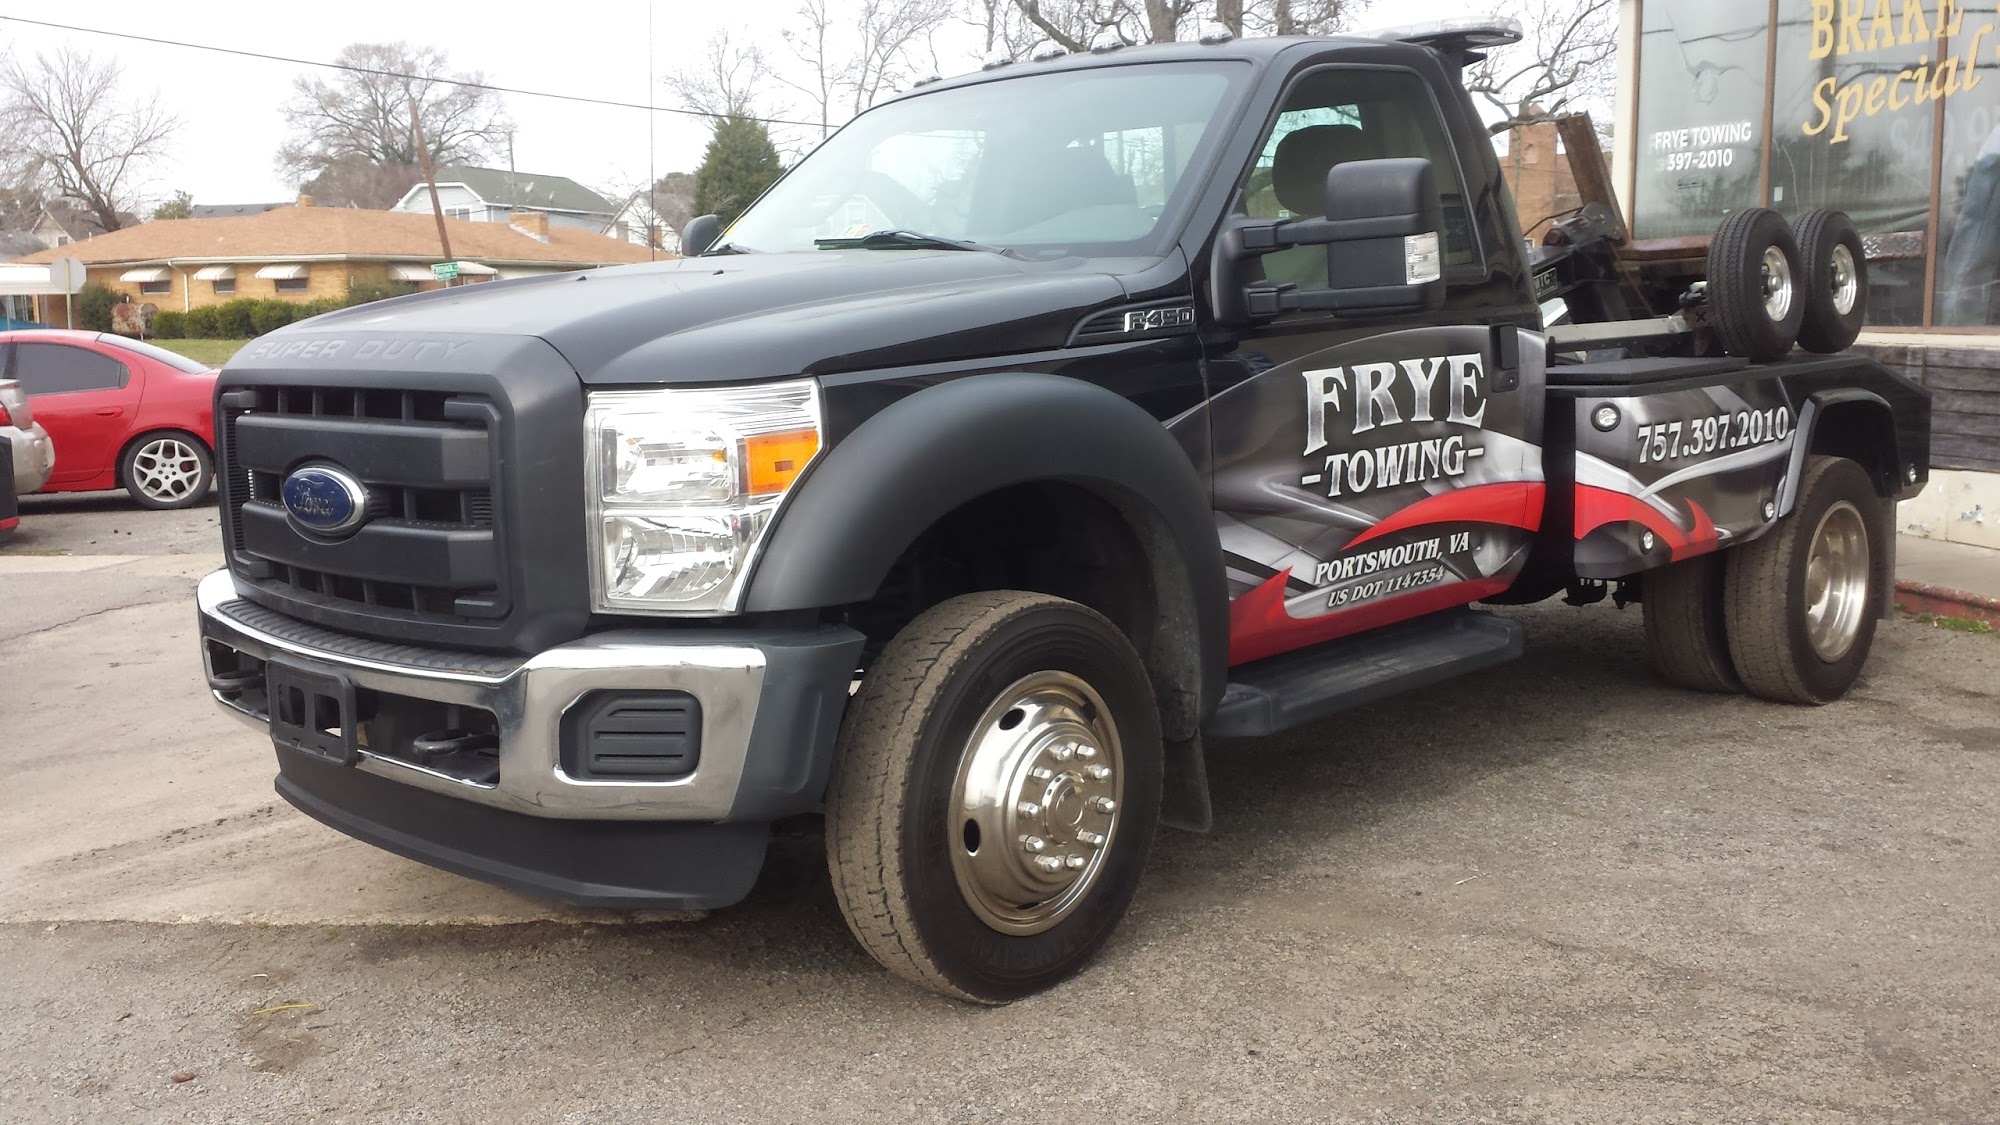 Frye's Tire & Towing